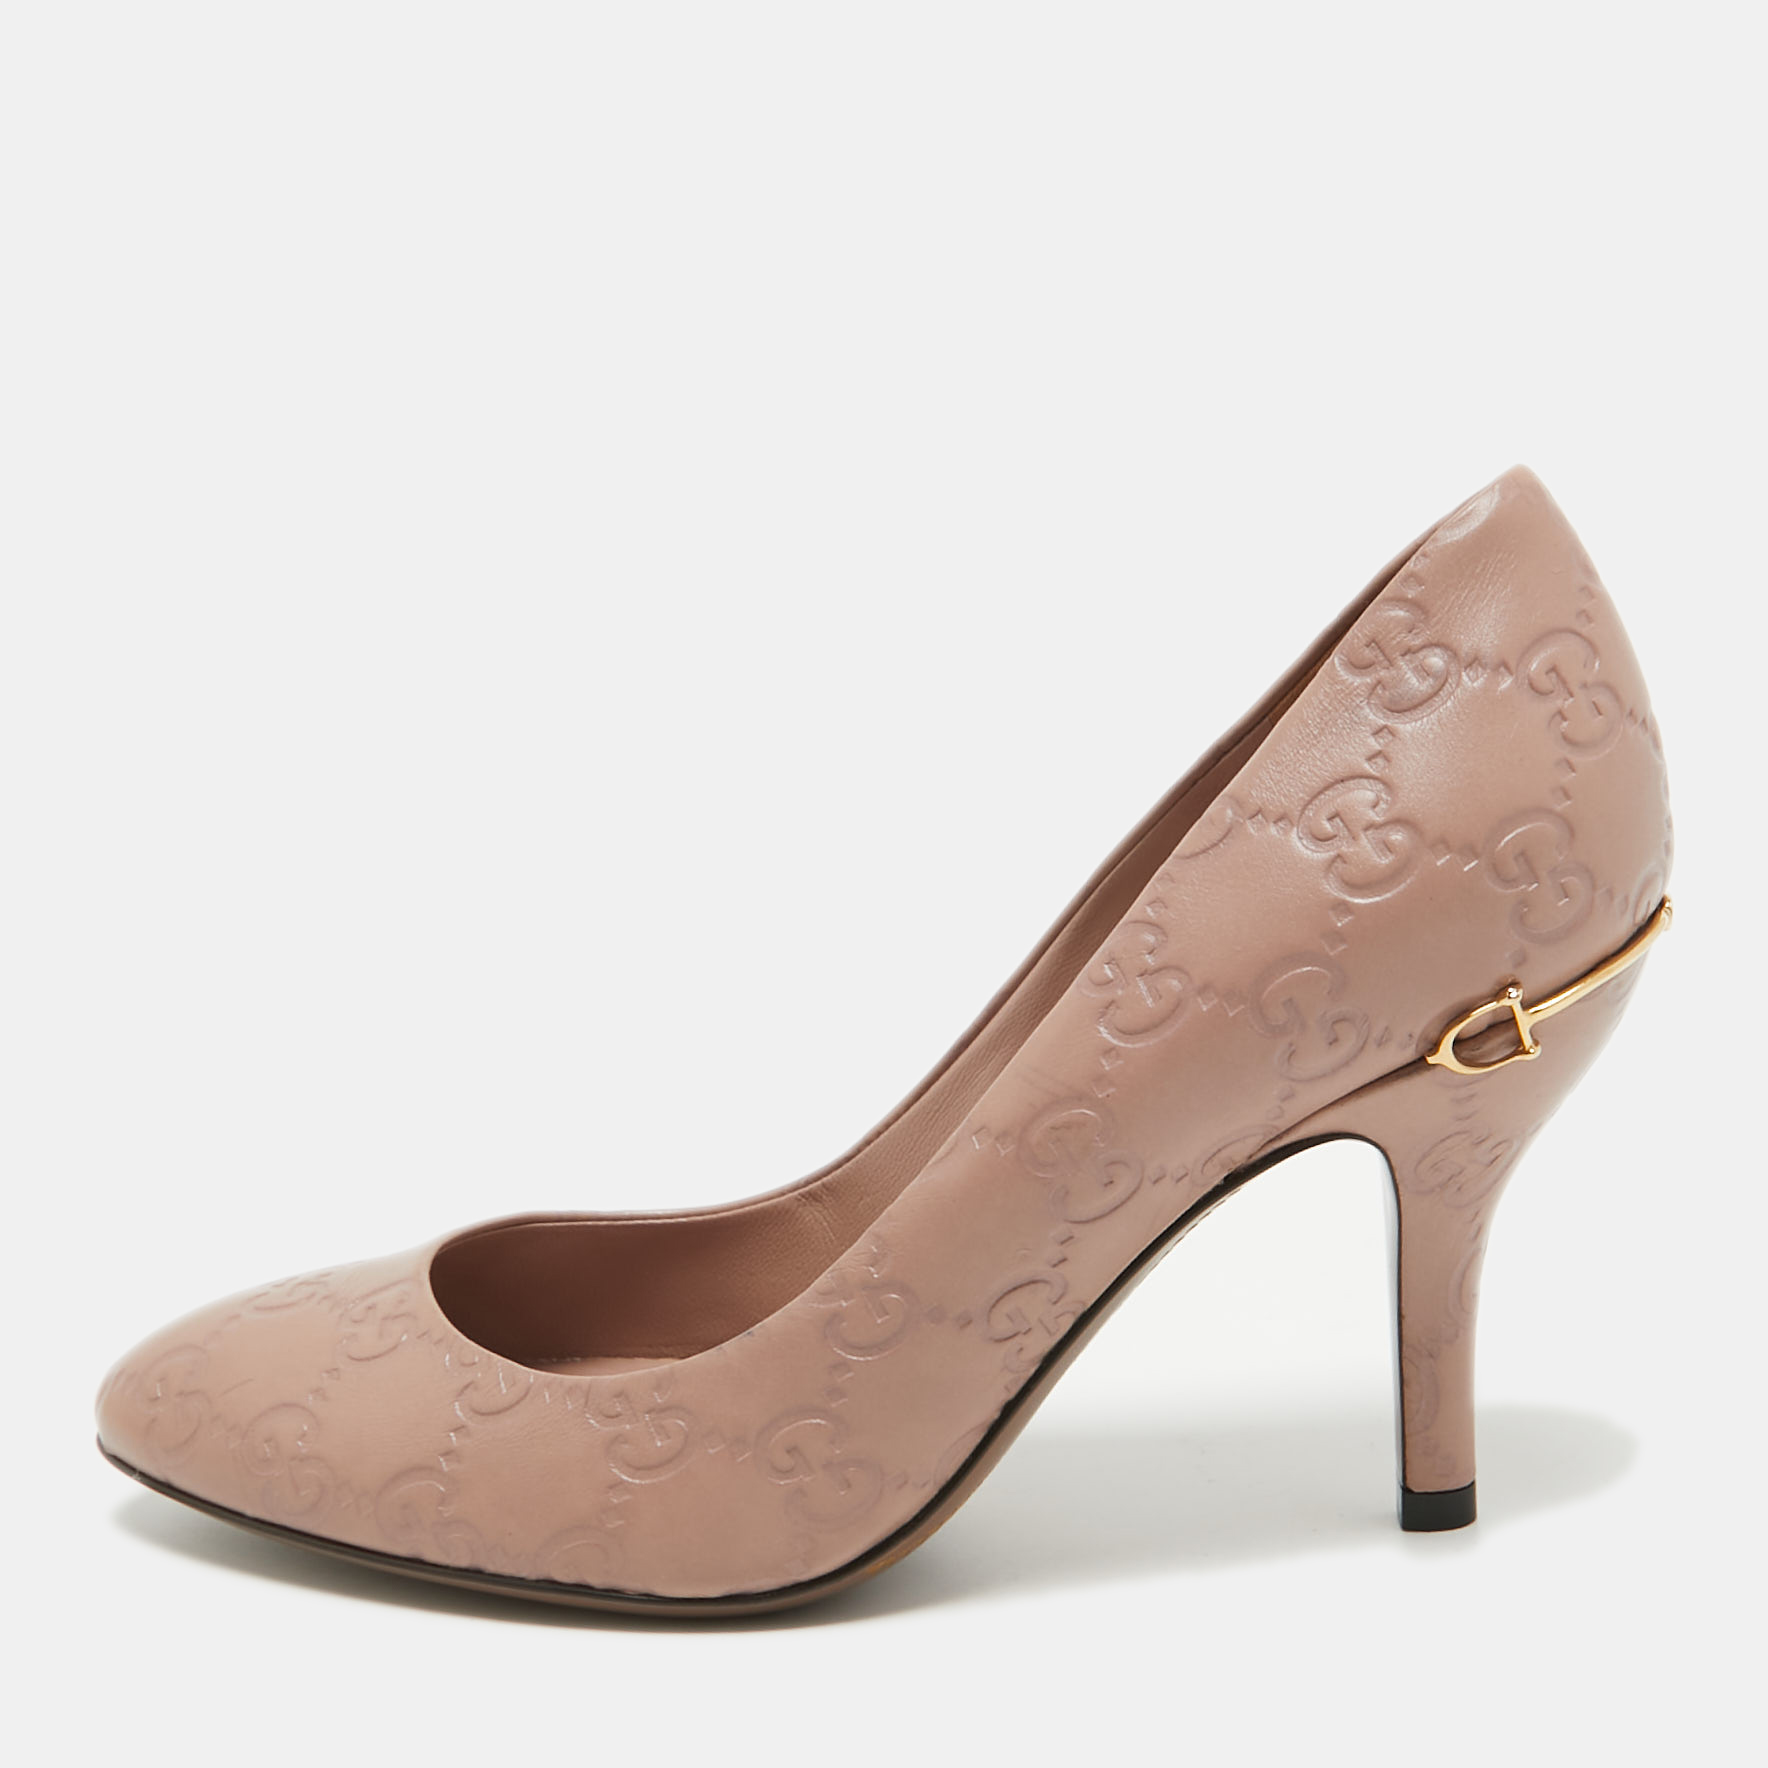 Gucci Pink Leather Guccissima Pumps Size 35.5